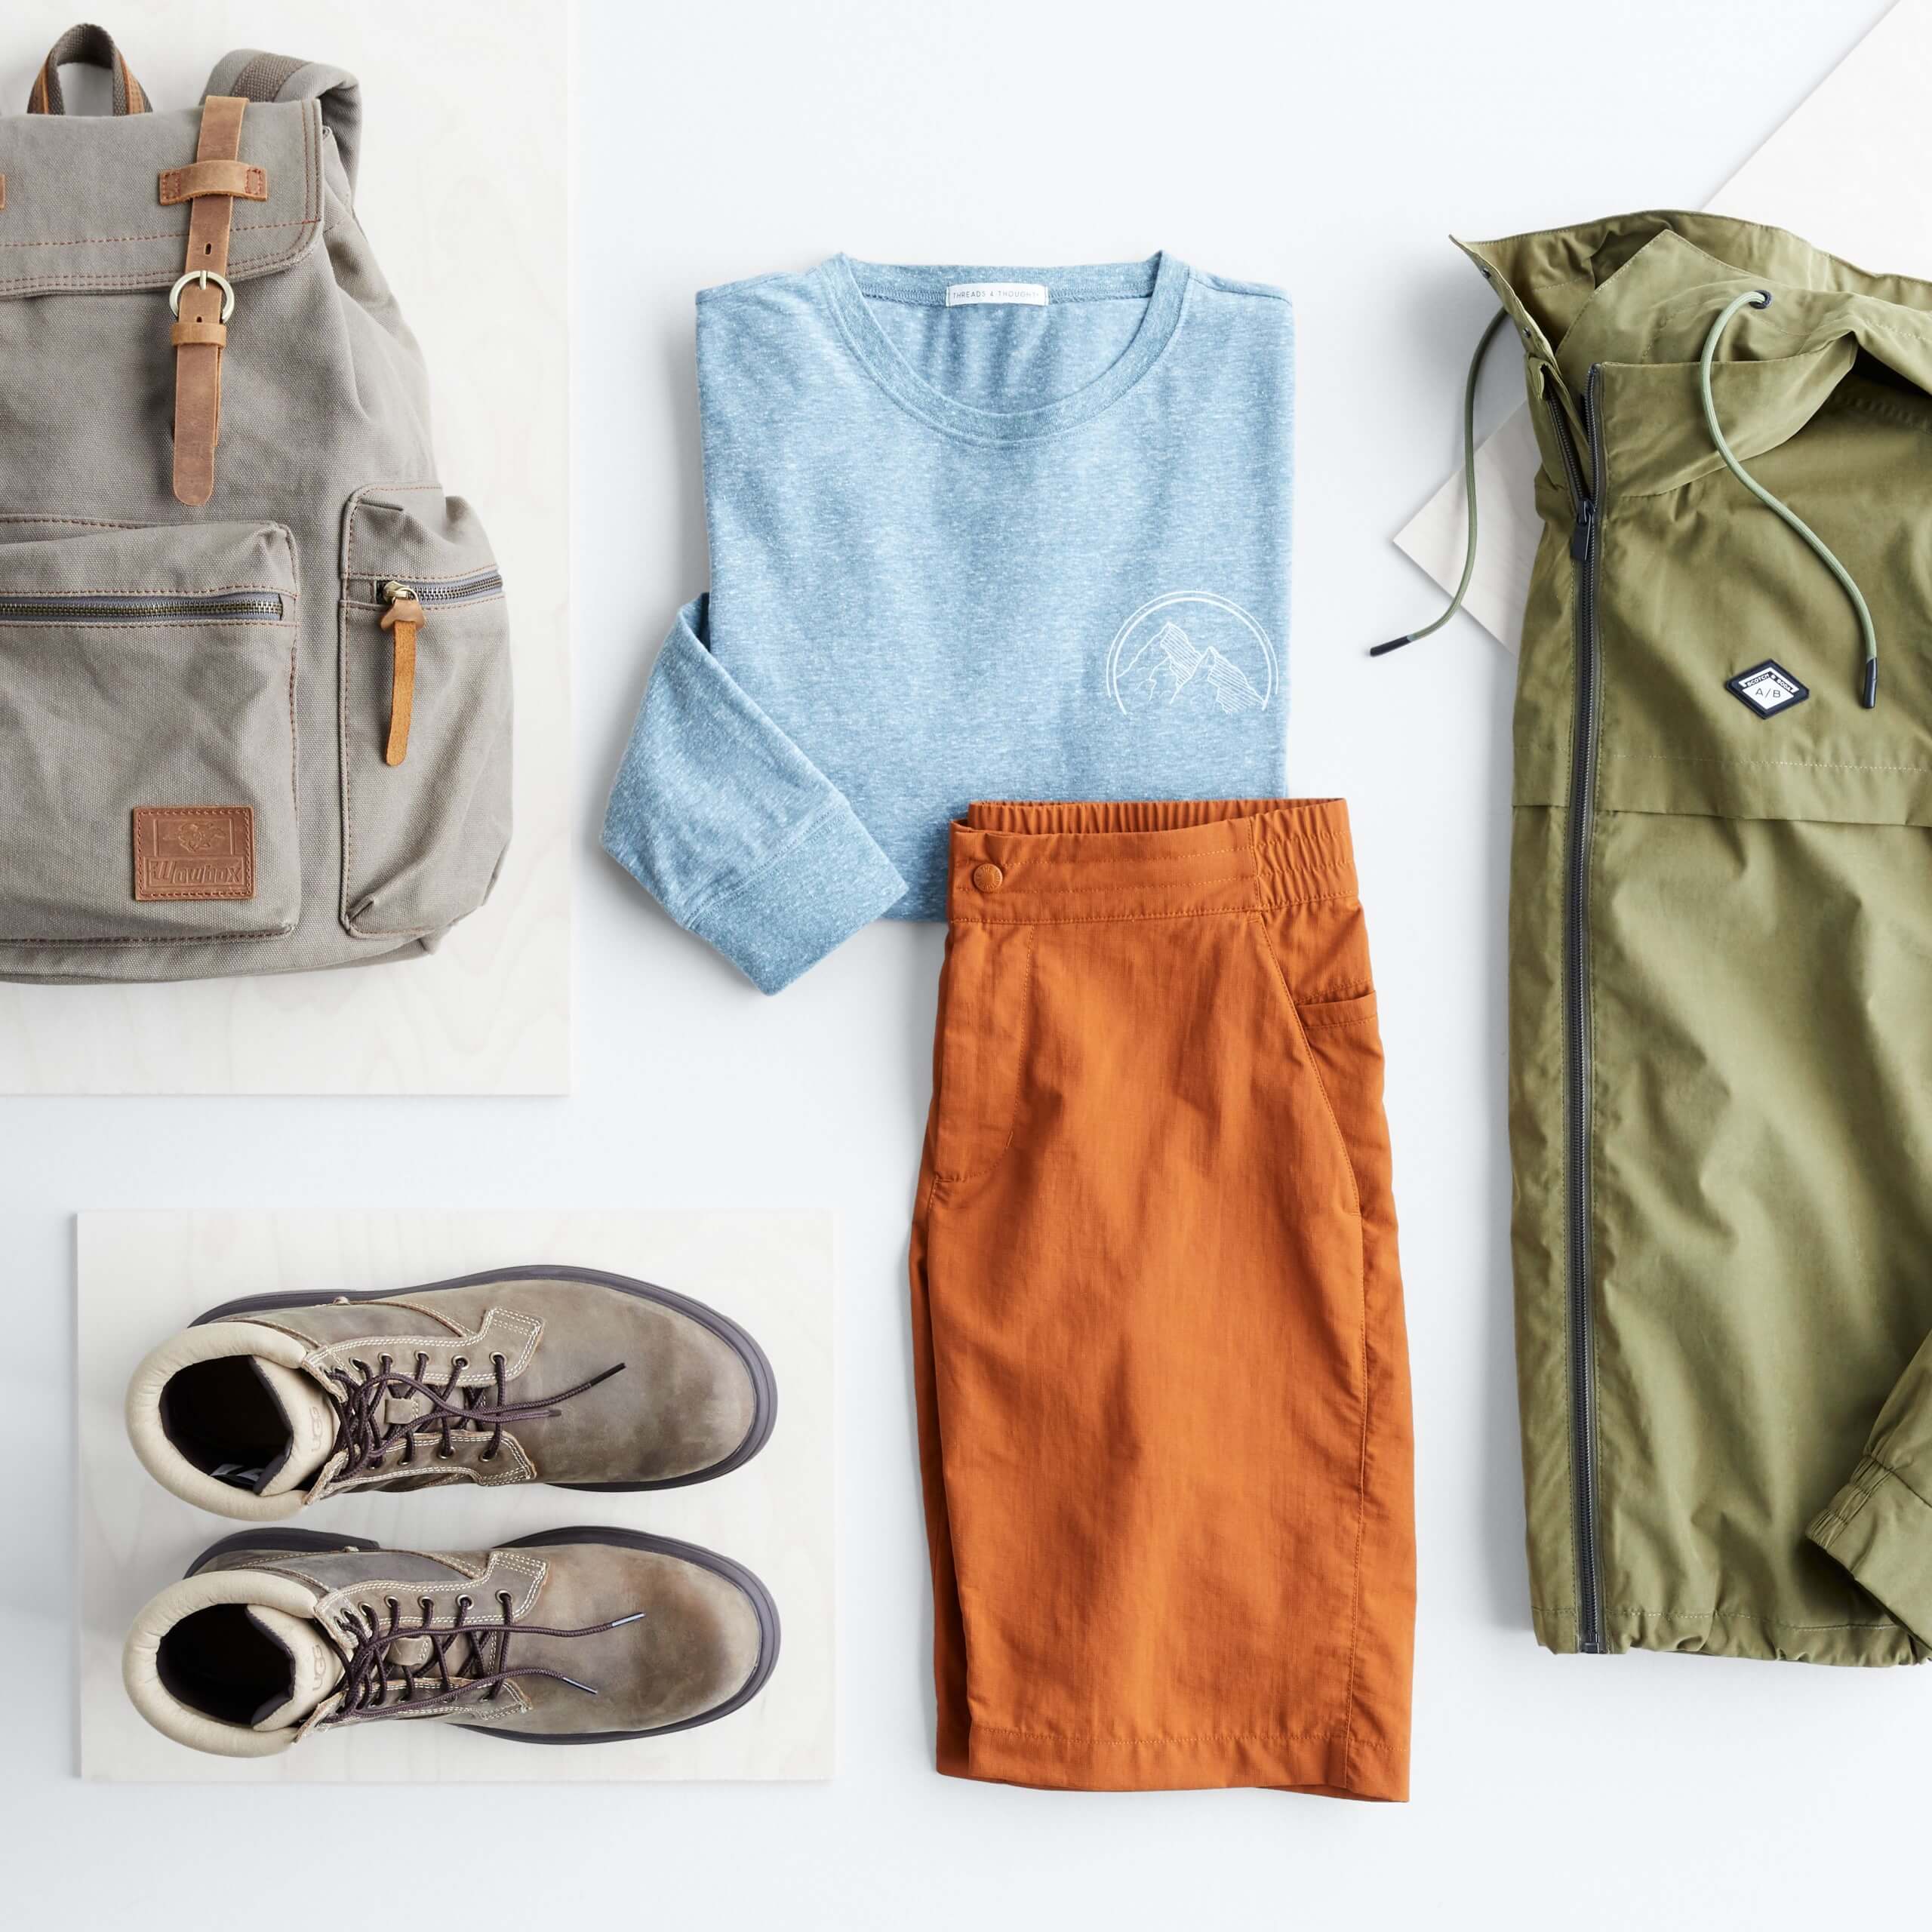 Stitch Fix Men’s outfit laydown featuring a blue crewneck, orange shorts, olive jacket, grey boots and grey backpack.